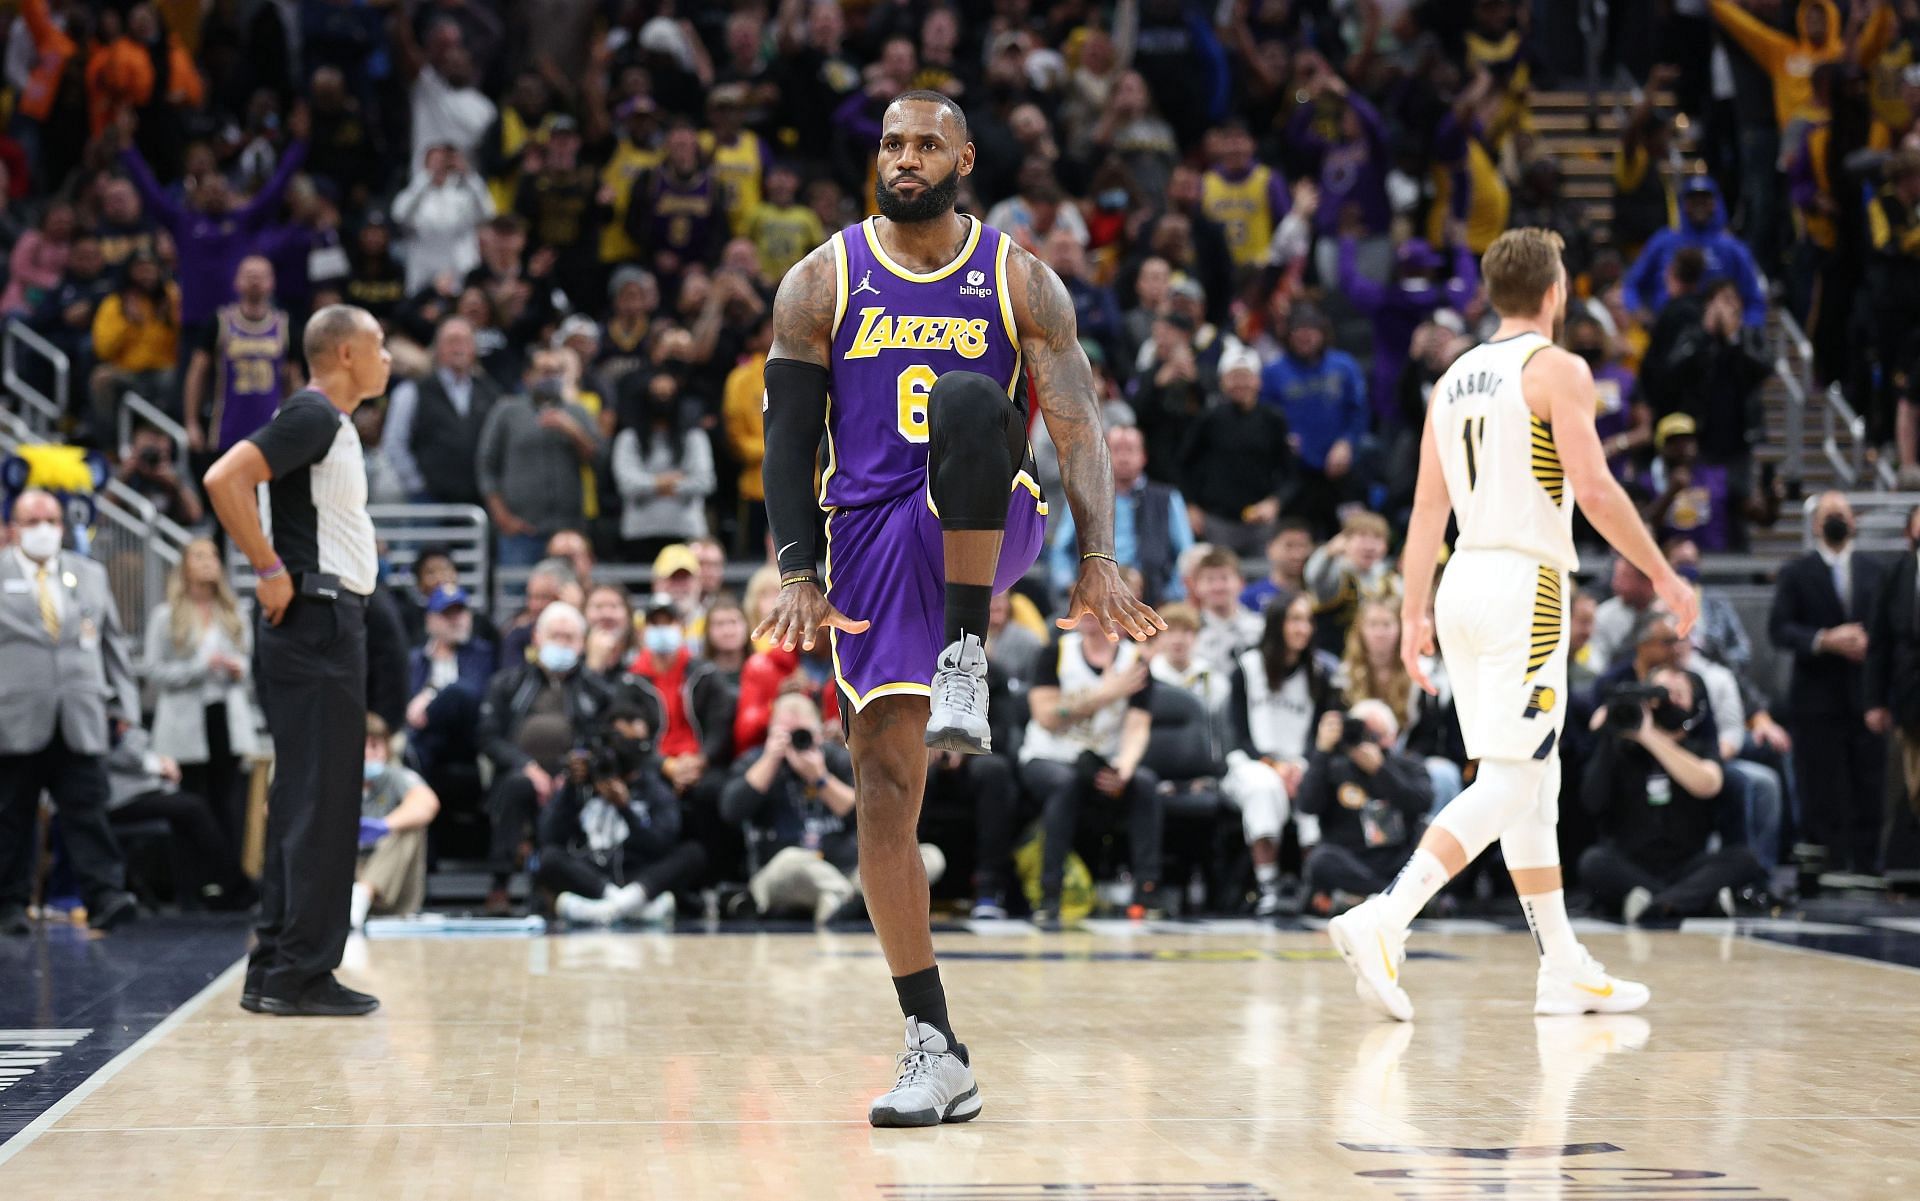 Incredible for him to play at such a high level” – Frank Vogel all praise  for LeBron James' 33 points, 65.0% shooting in LA Lakers' easy win over  Oklahoma City Thunder